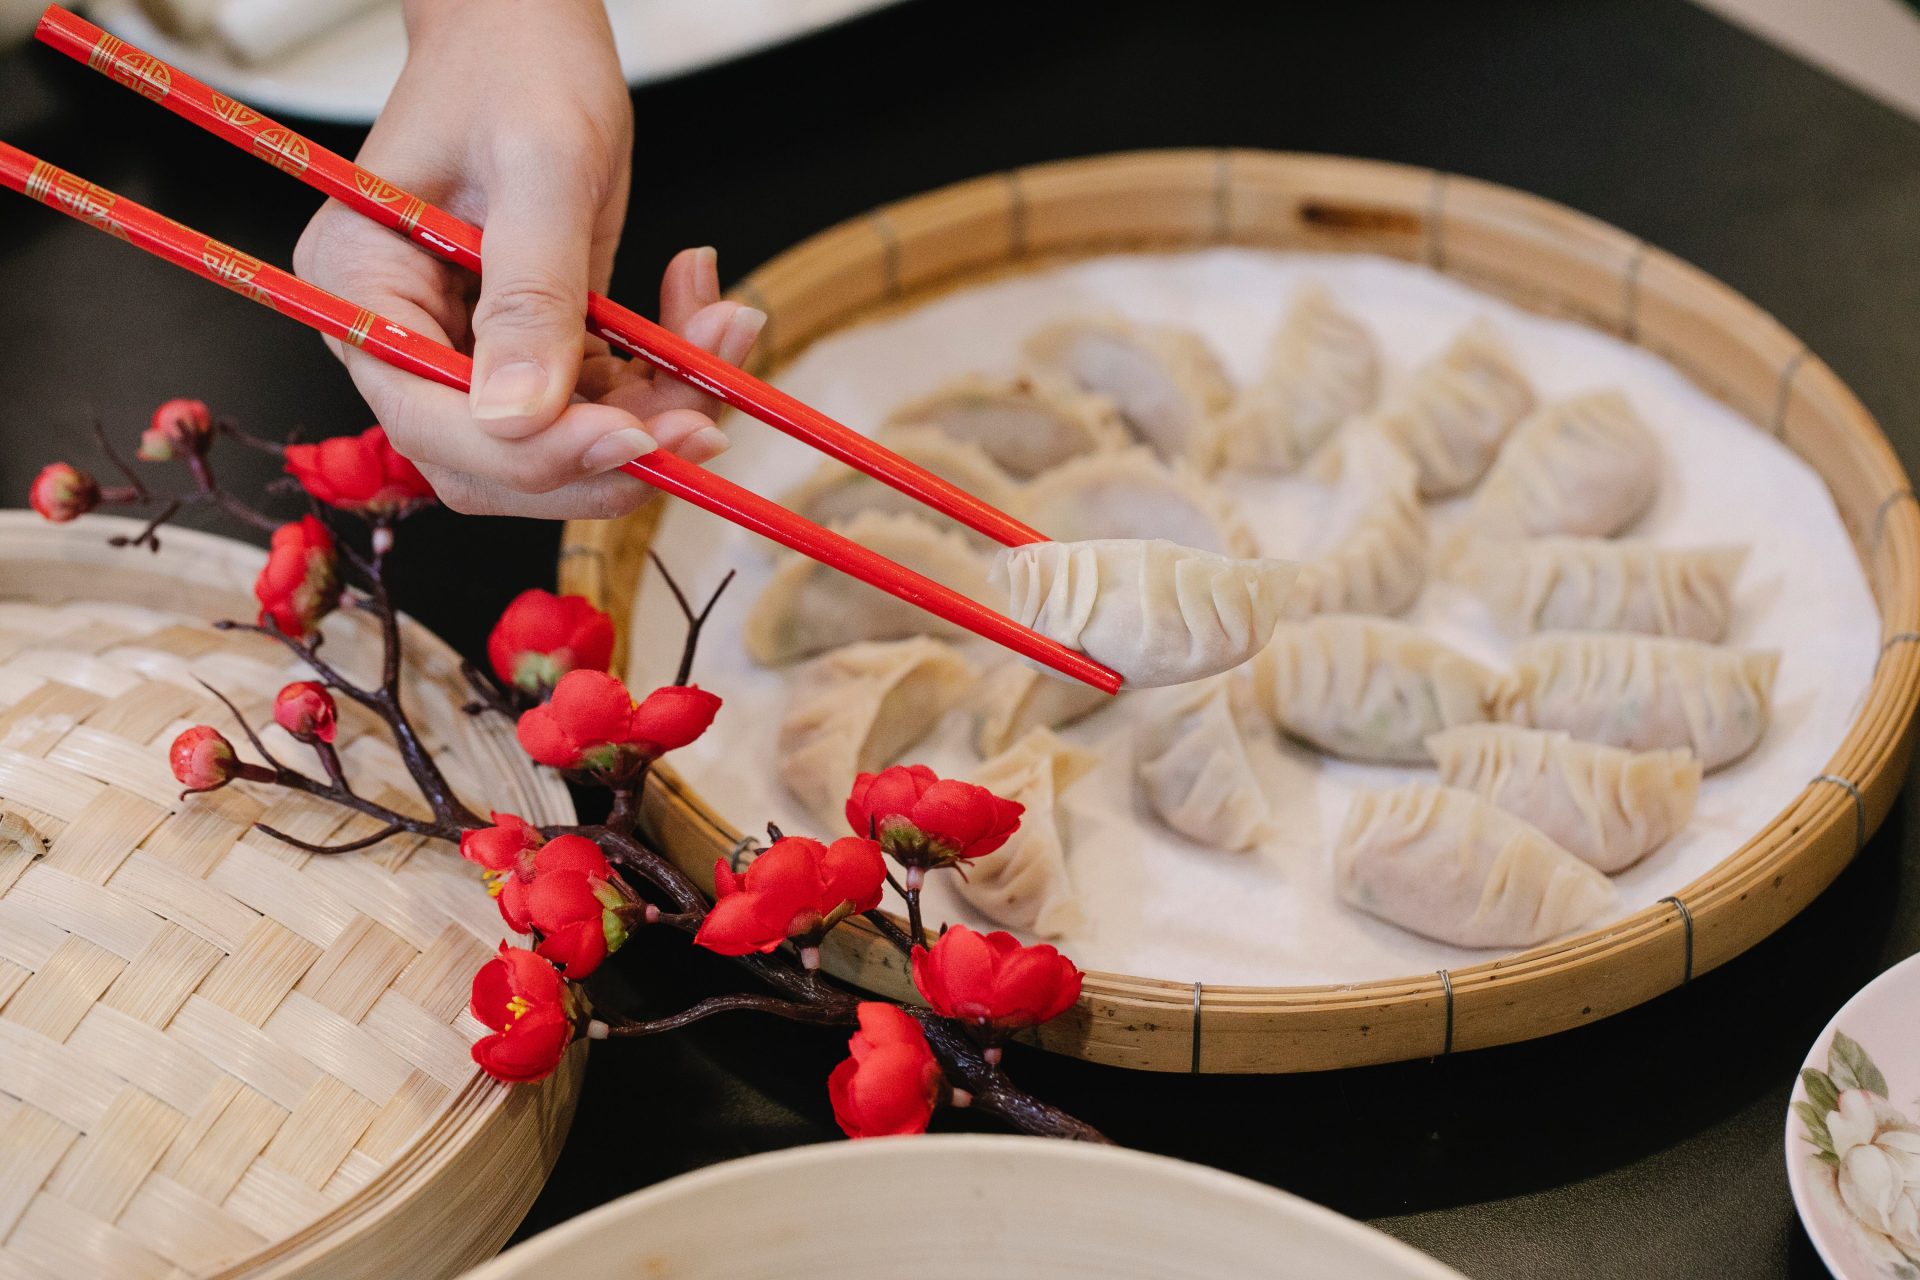 Why We Eat Dumplings To Celebrate the Lunar New Year